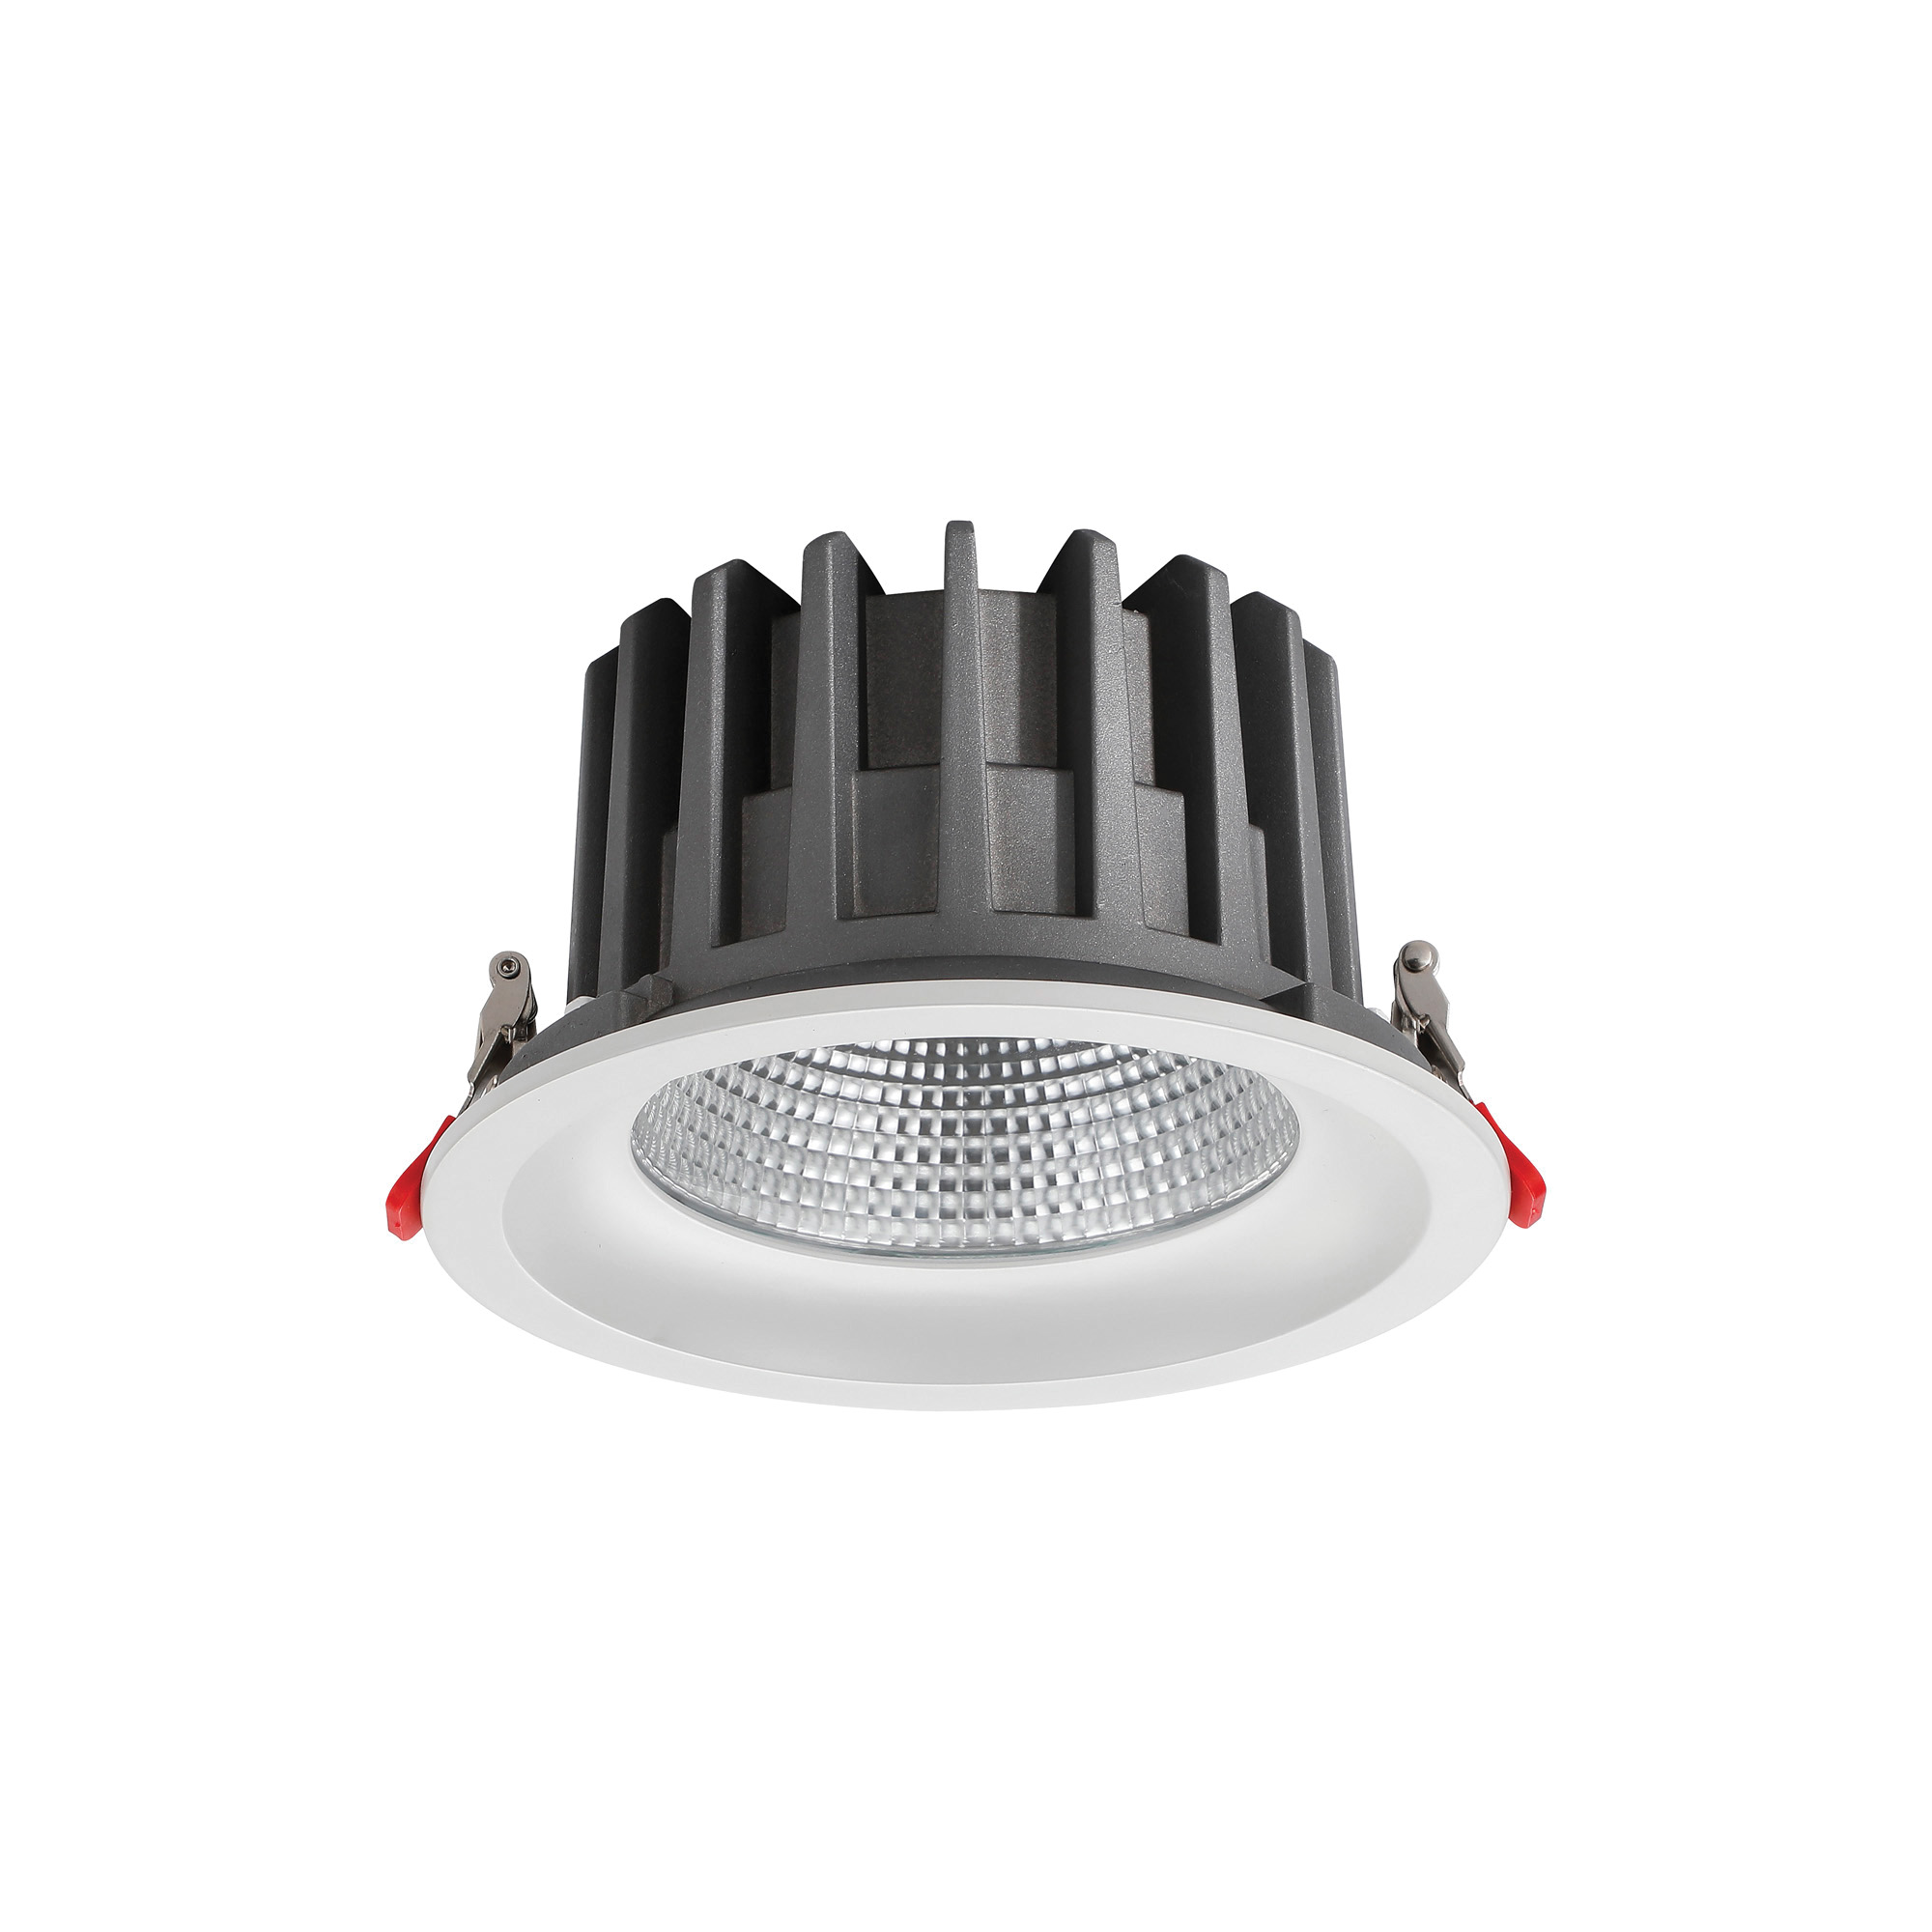 DL200065  Bionic 40; 40W; 1000mA; White Deep Round Recessed Downlight; 3540lm ;Cut Out 175mm; 40° ; 4000K; IP44; DRIVER INC.; 5yrs Warranty.